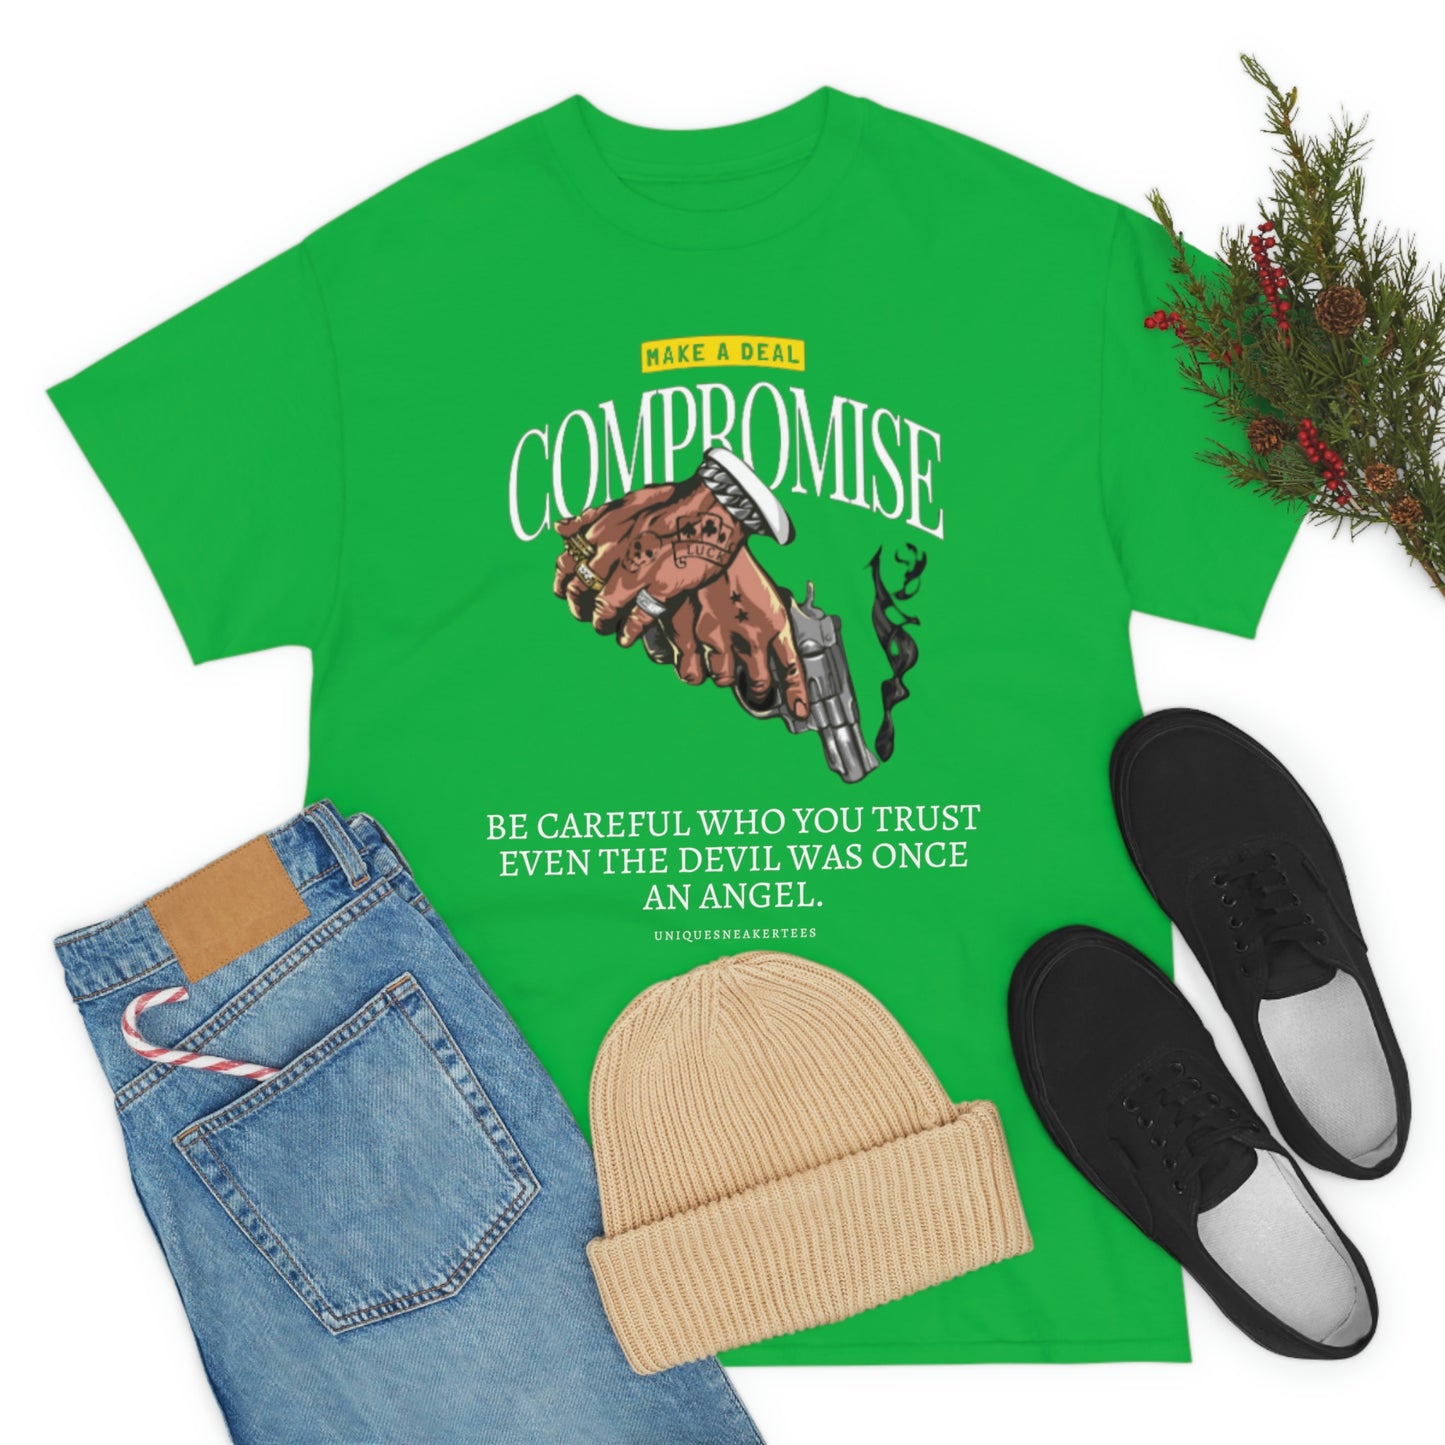 Compromise Tee